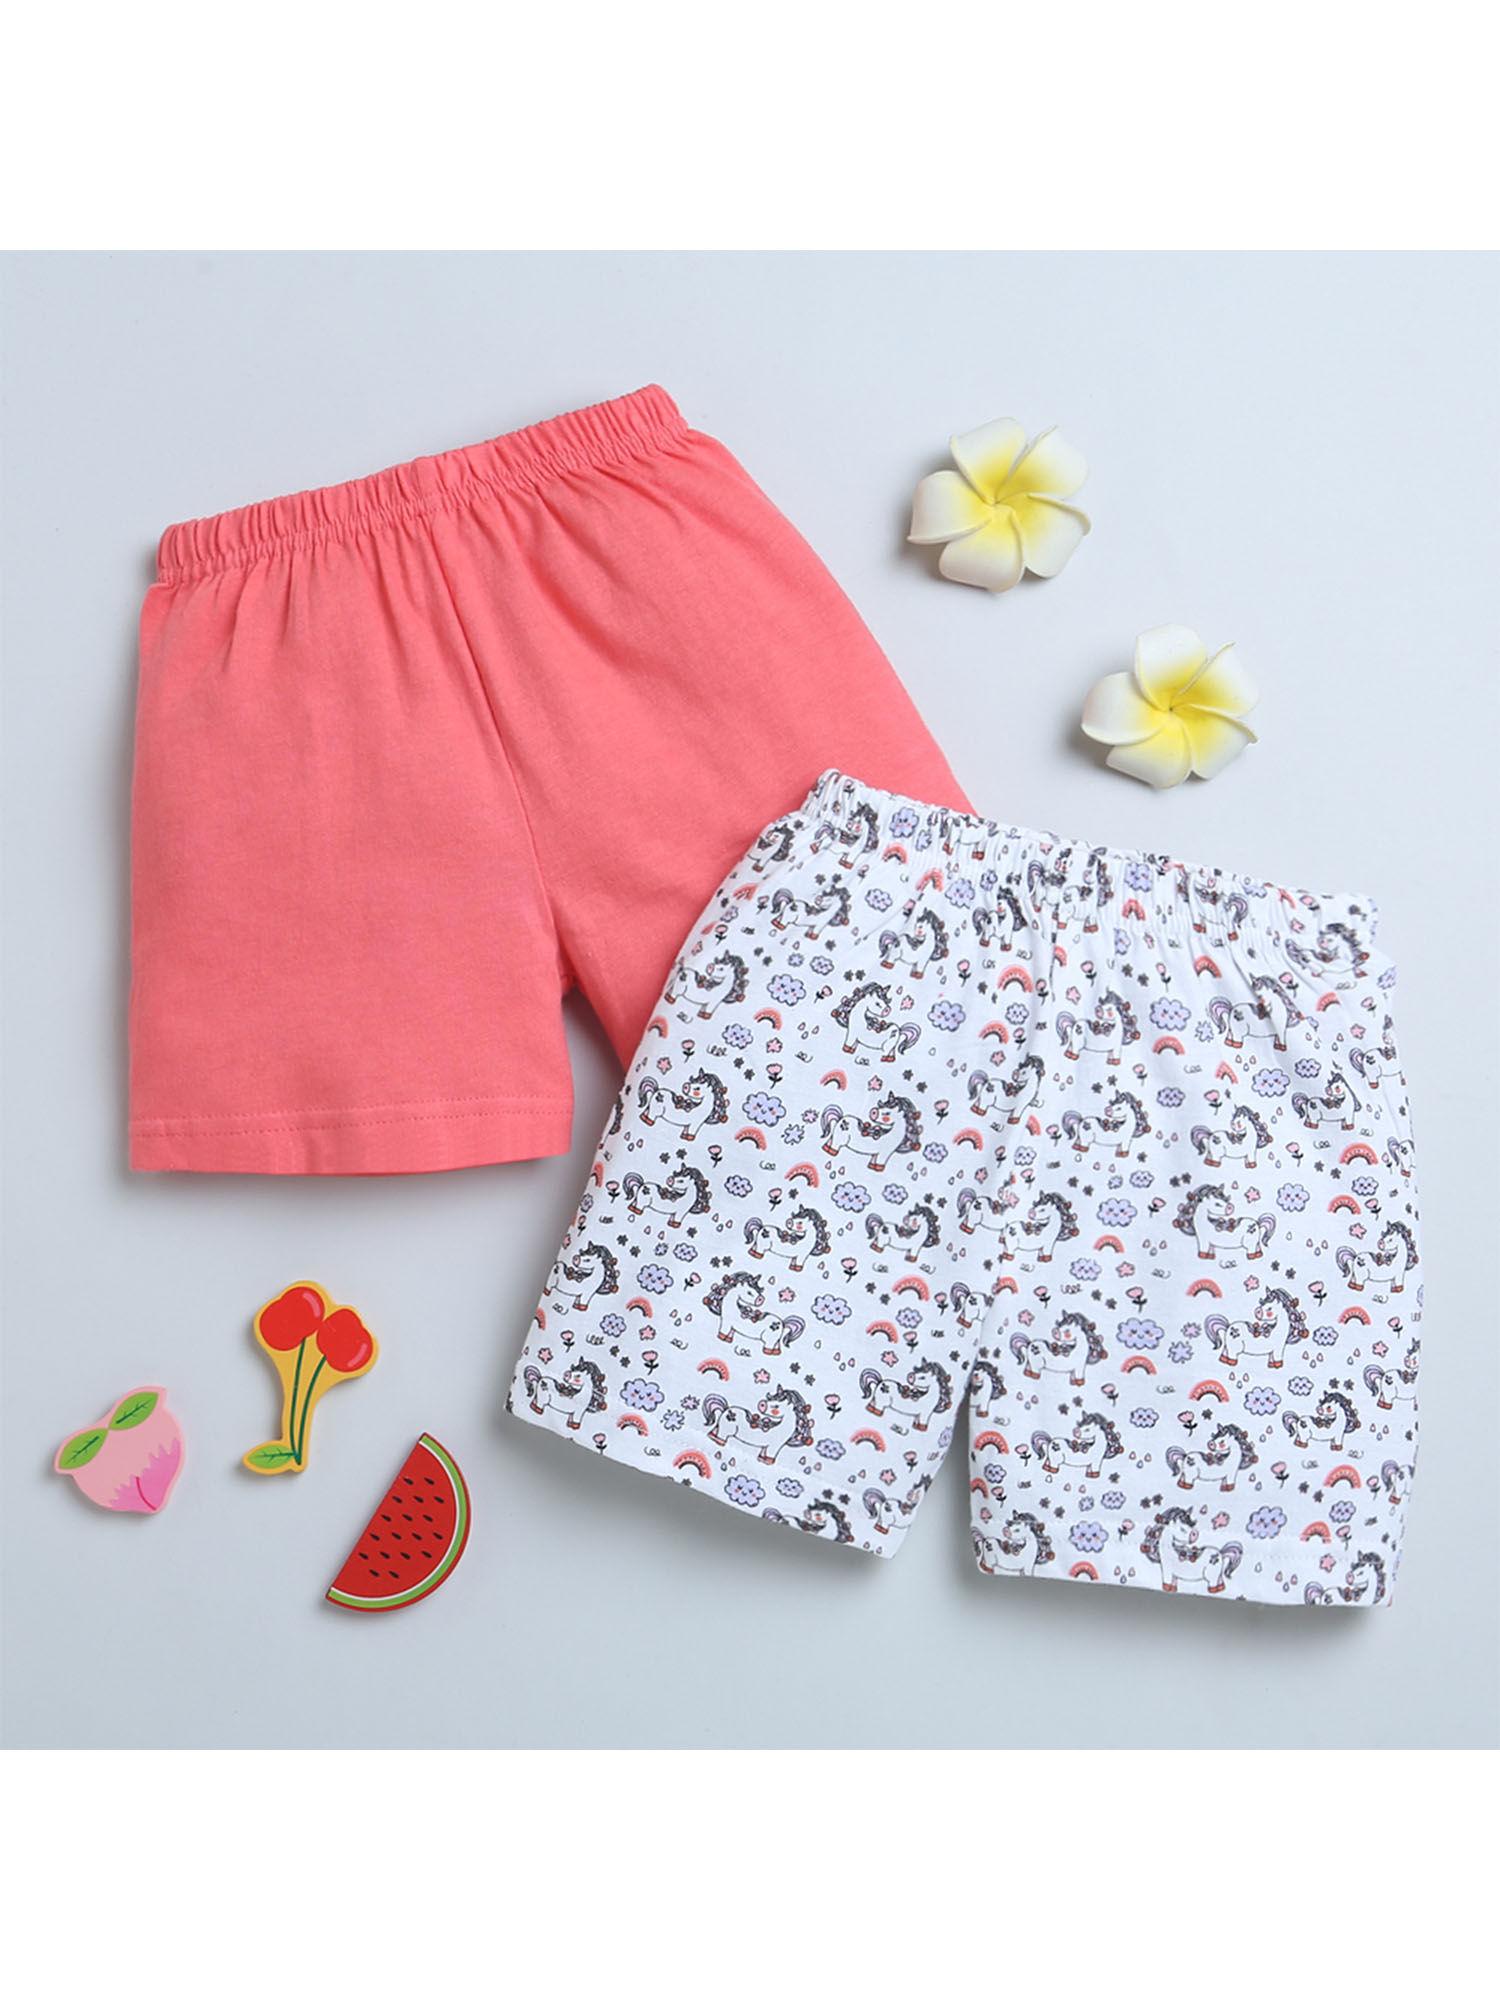 coral-and-white-girls-shorts-(set-of-2)